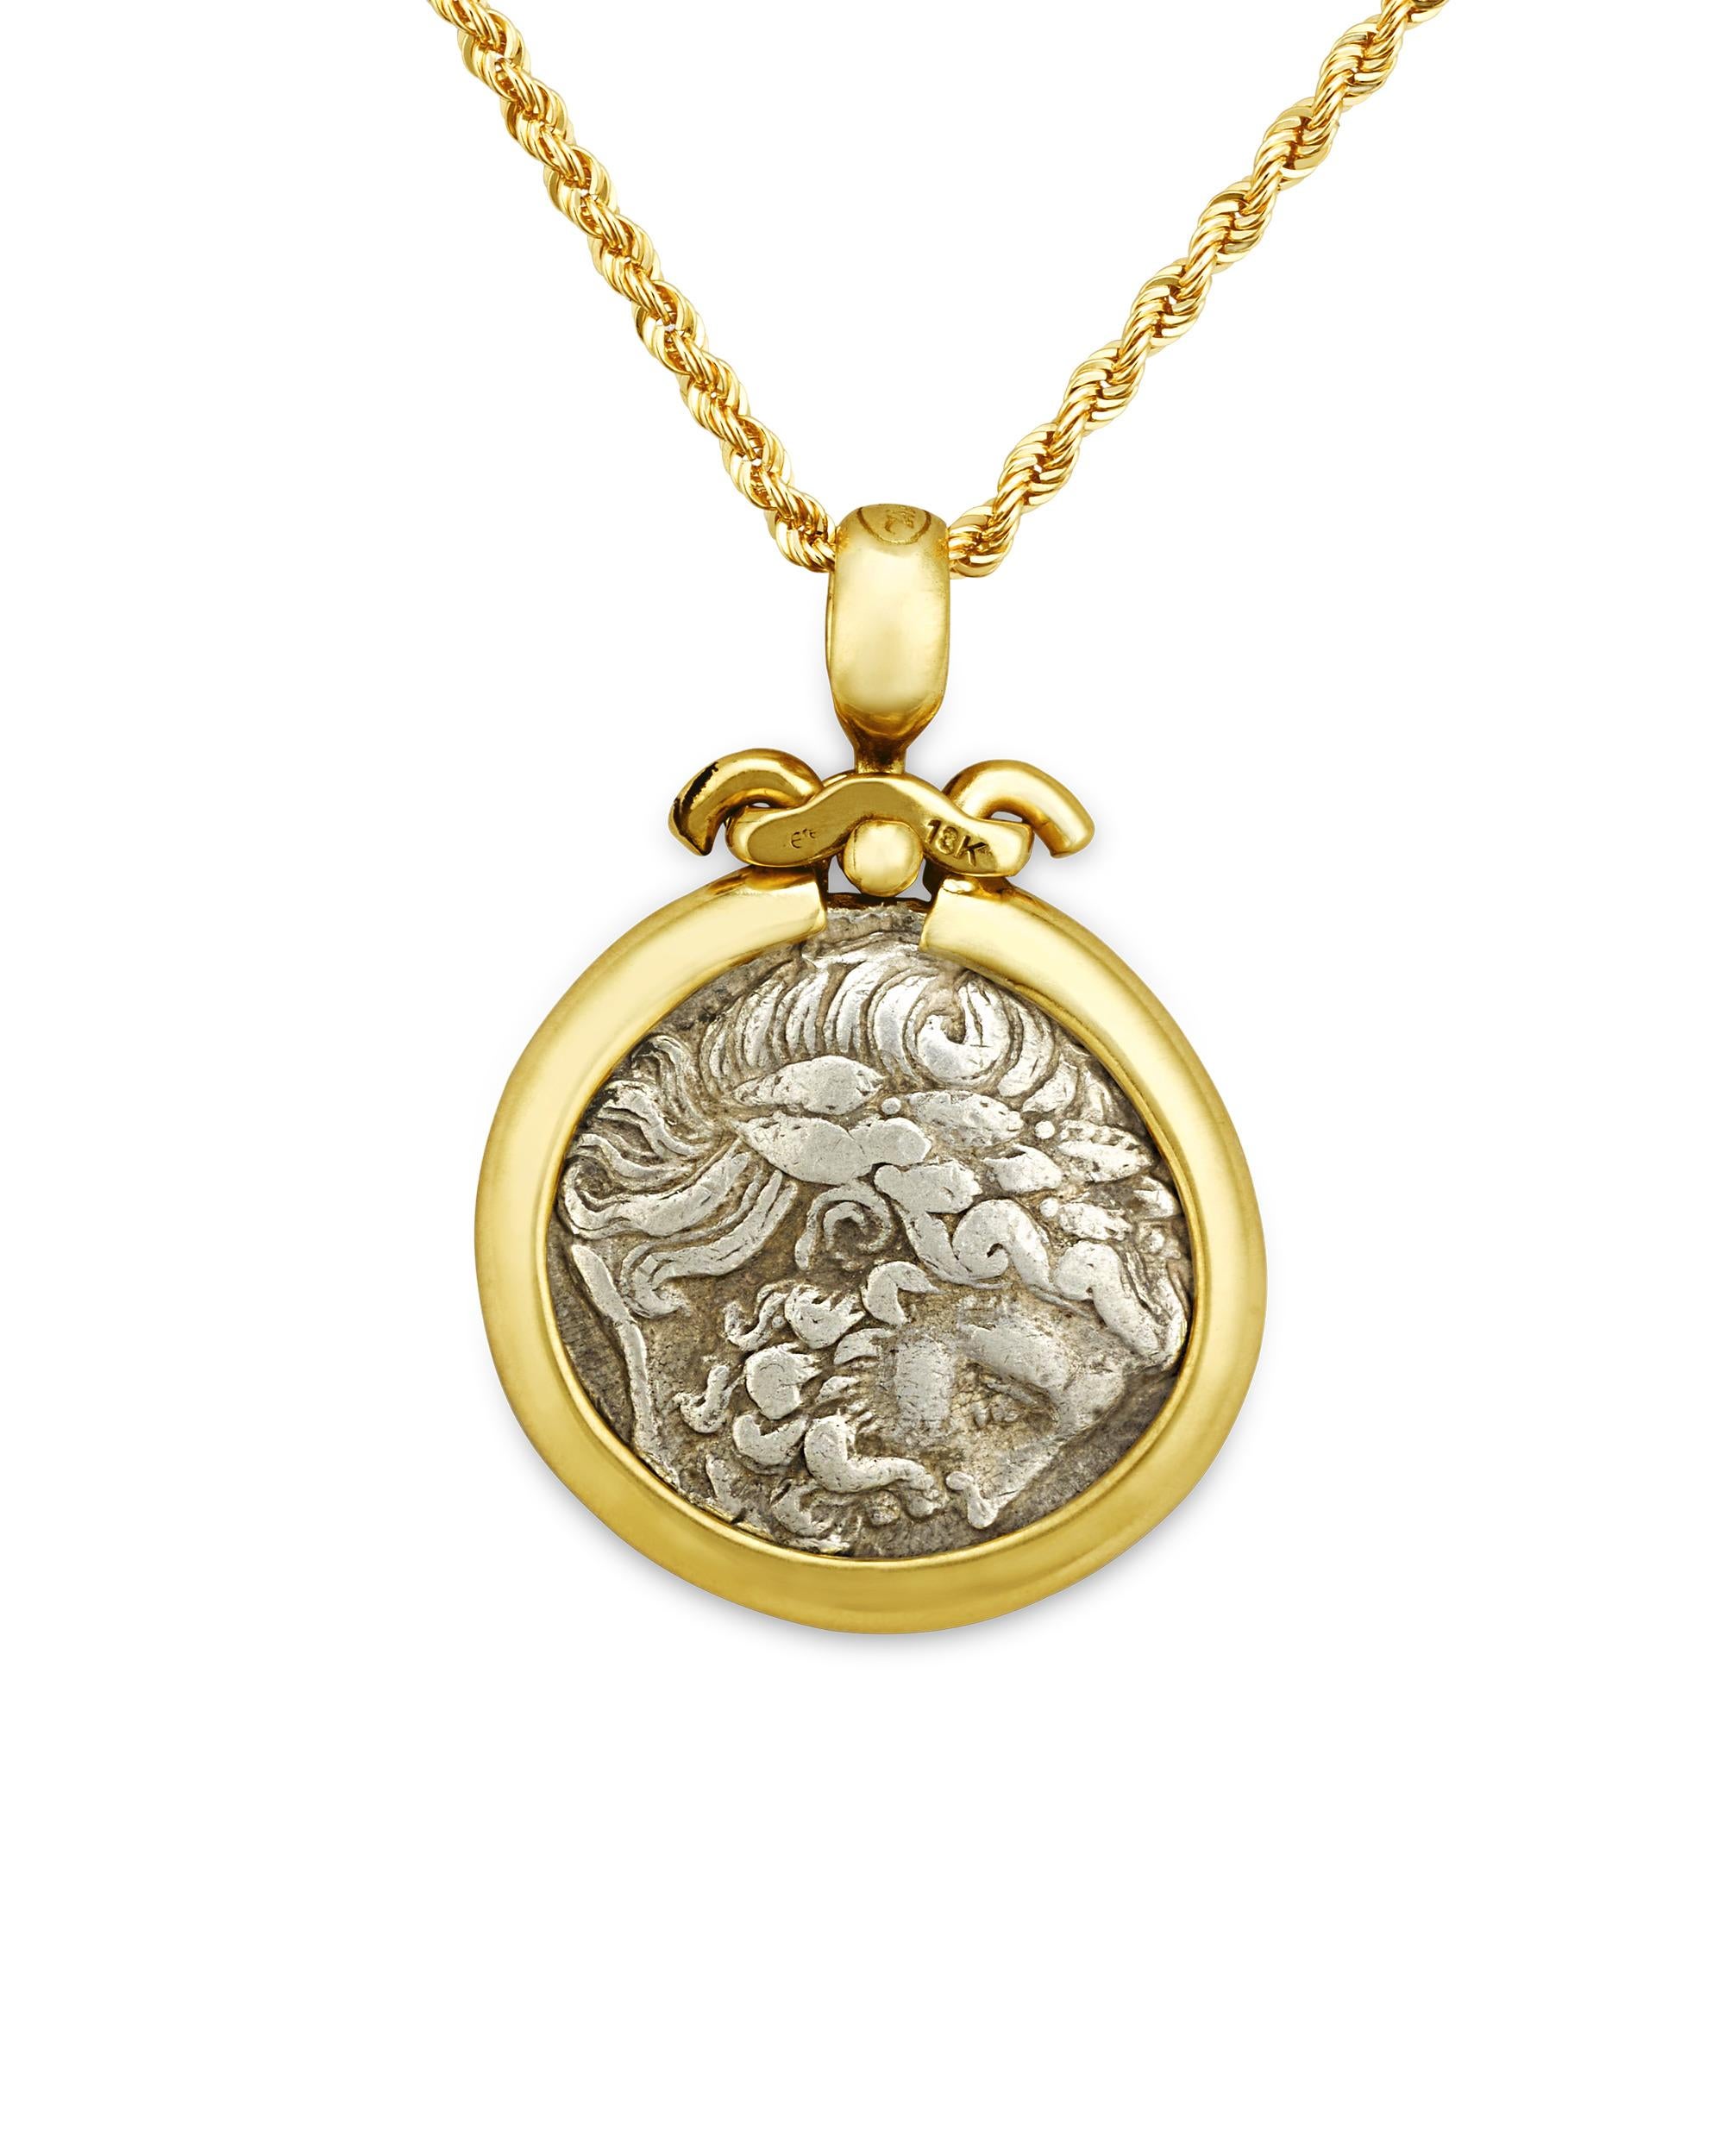 Over 2300 years old, the silver coin set in this elegant necklace dates to 348-342 BCE and celebrates King Philip II of Macedonia. From a later Amphipolis mint, the laureate head of Zeus features prominently on the front of the tetradrachm. On the